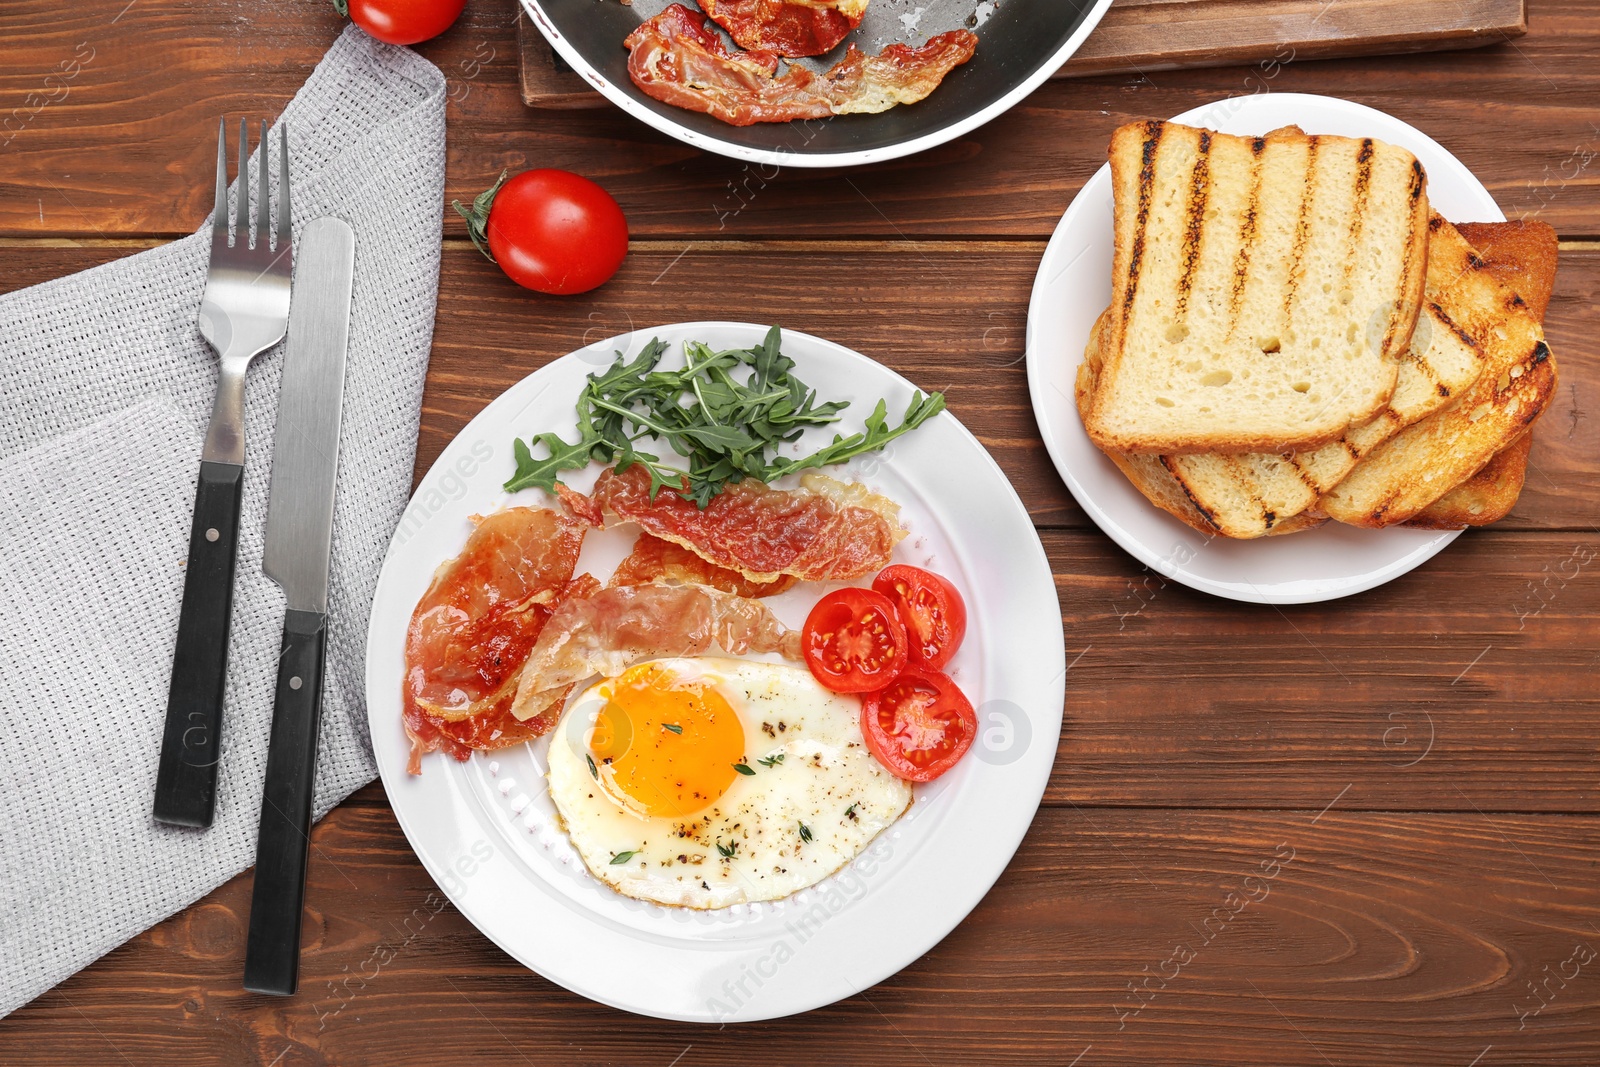 Photo of Plate with fried egg, bacon and tomatoes on wooden background